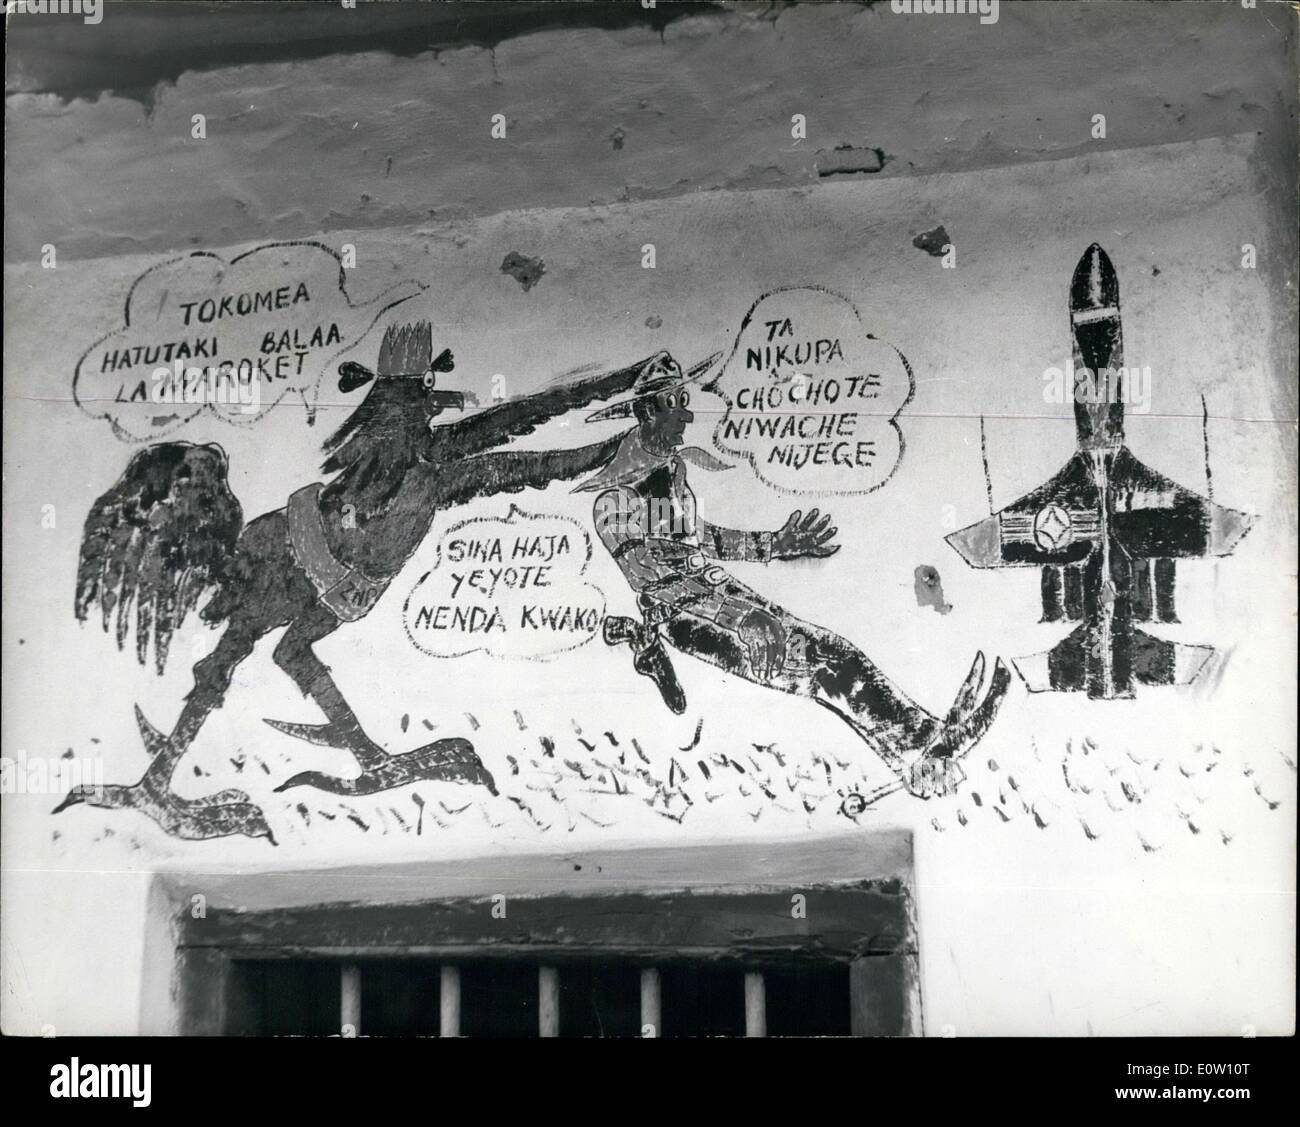 Nov. 11, 1960 - CARTOONS ON SIDE OF HOUSES IN ZANZIBAR - PROTESTING AGAINST INSTALLATION OF U.S. SATELLITE TRACKING STATION: For centuries - International events have had little interest for the natives of Zanzibar. But now that the Americans are constructing a Satellite Tracking Station - complete with radio masts and antenna towers - 15 miles from Zanzibar Town - there have been a number of voices raised in protest Stock Photo